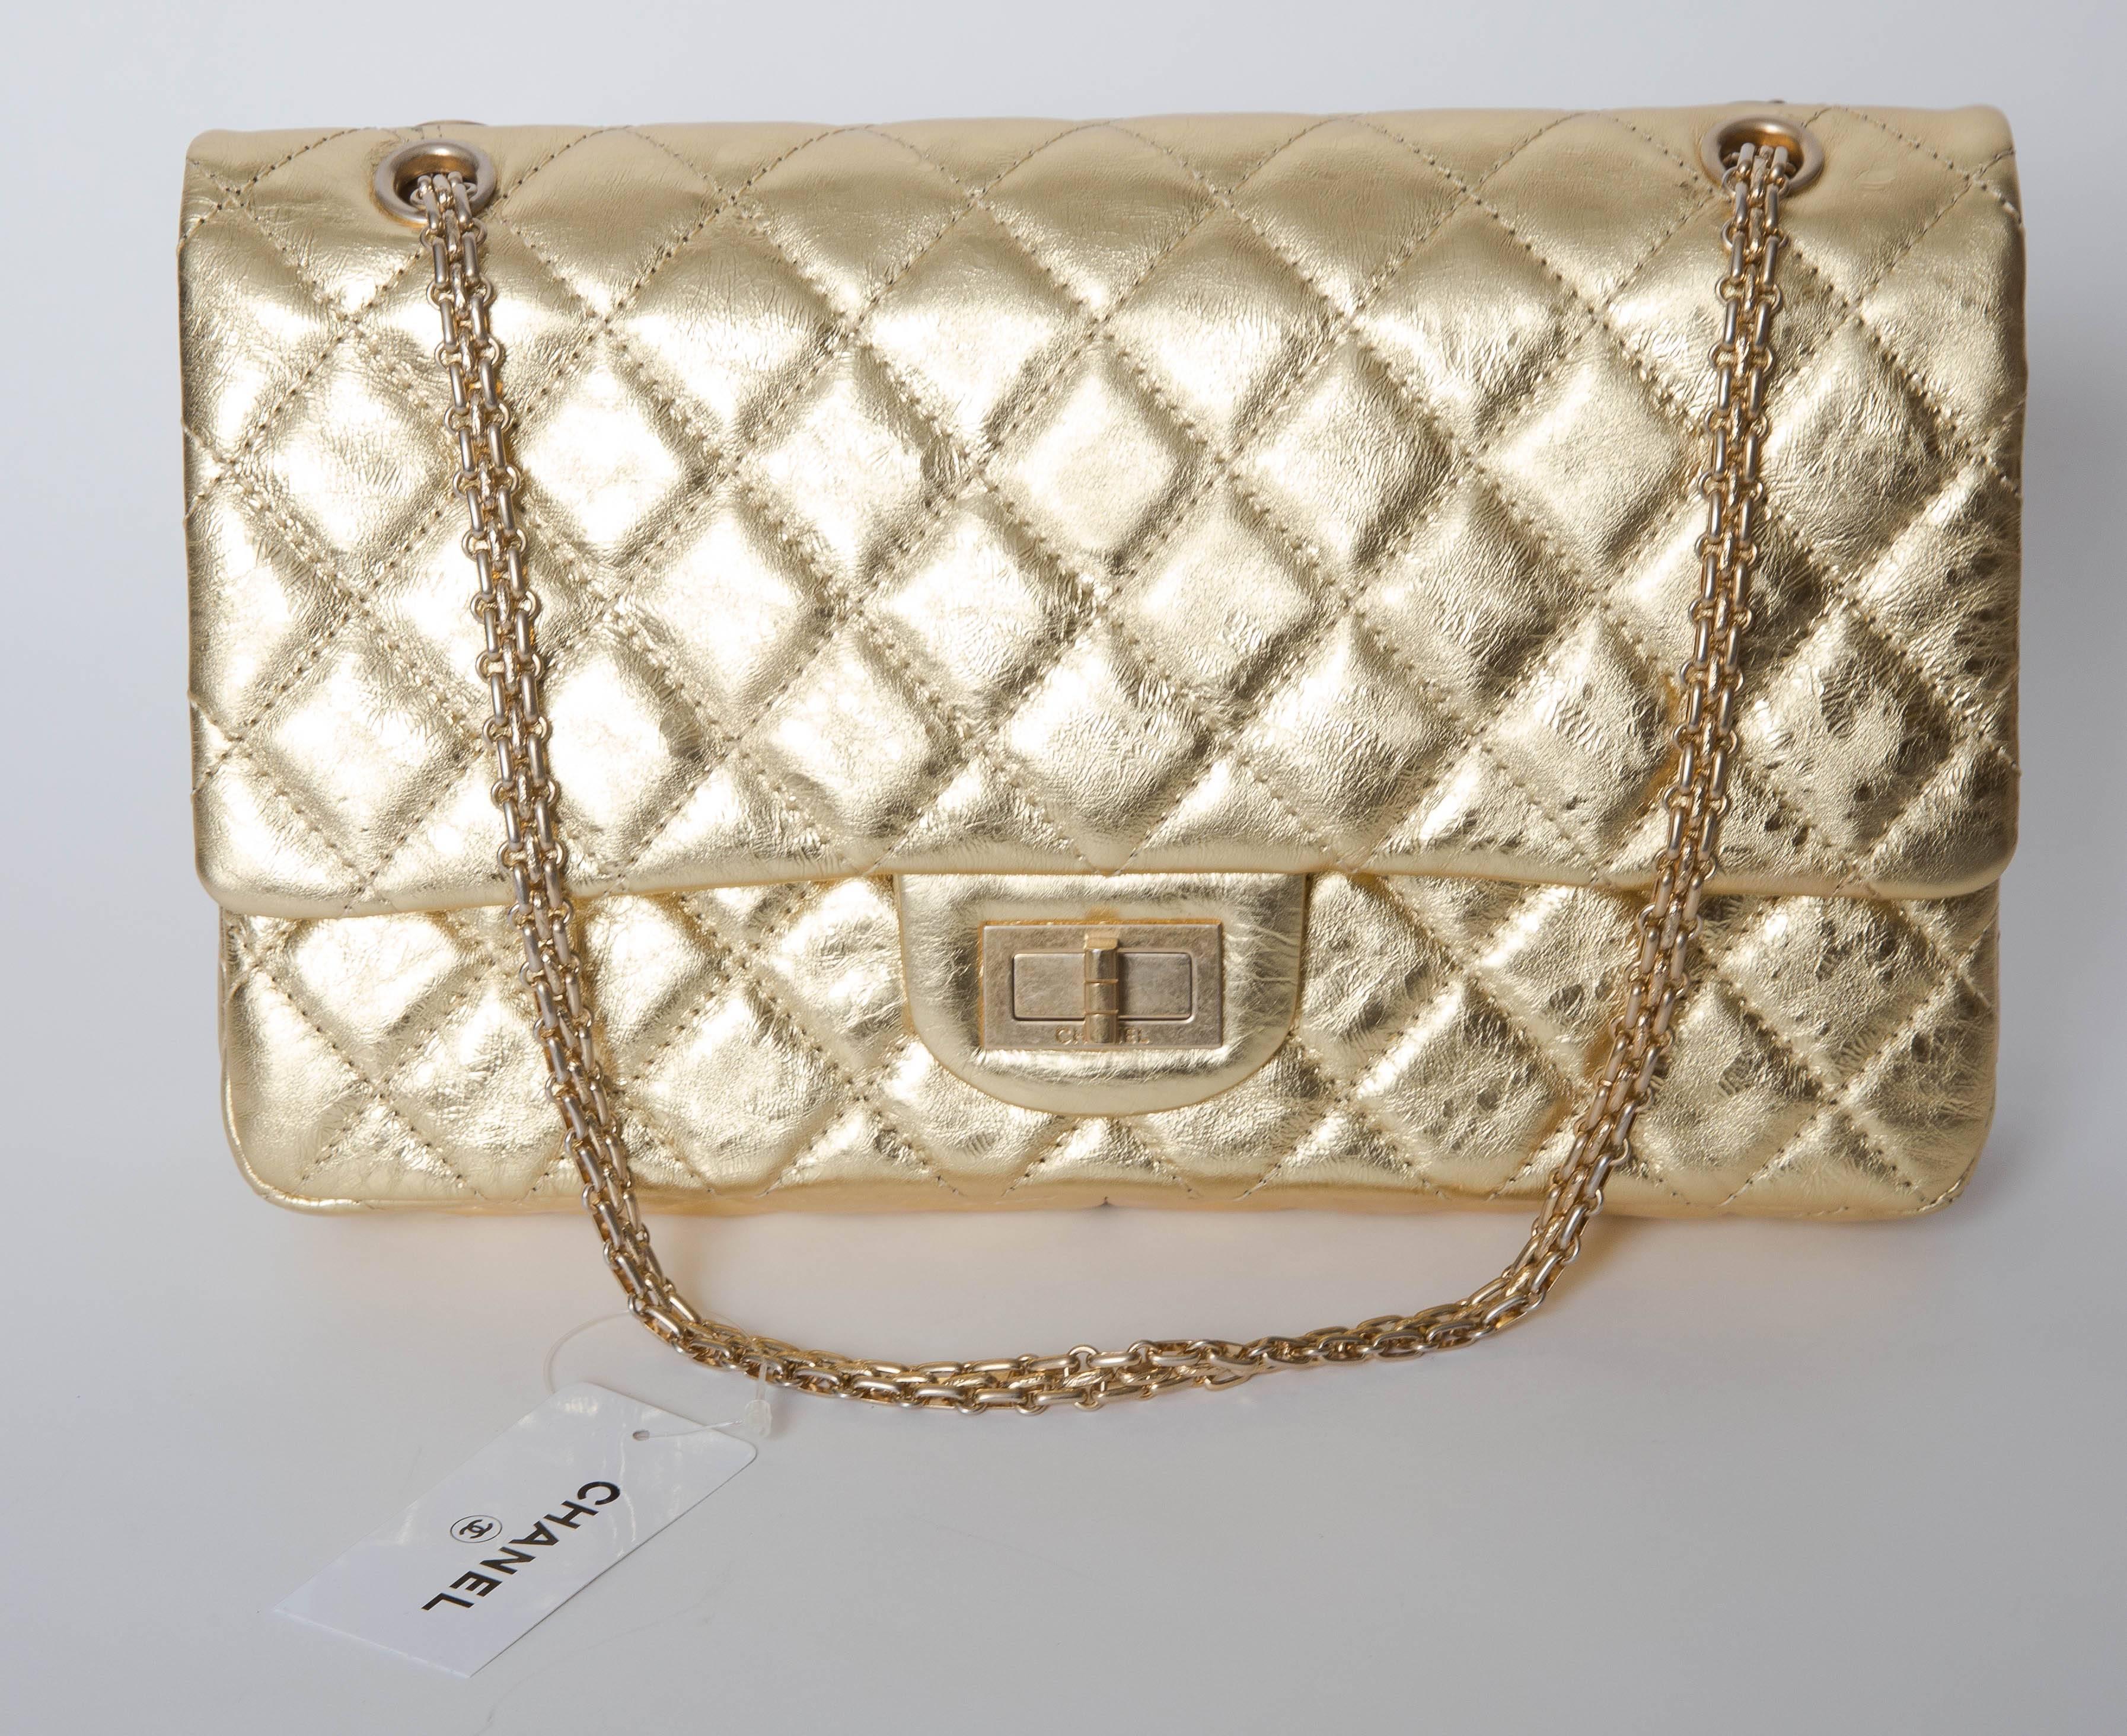  Metallic gold-tone quilted leather Chanel Reissue 227 Double Flap Bag with gold hardware, dual chain-link shoulder straps, exterior flap pocket, two interior pockets and a third pocket featuring a zip closure. Mademoiselle turn-lock closure at